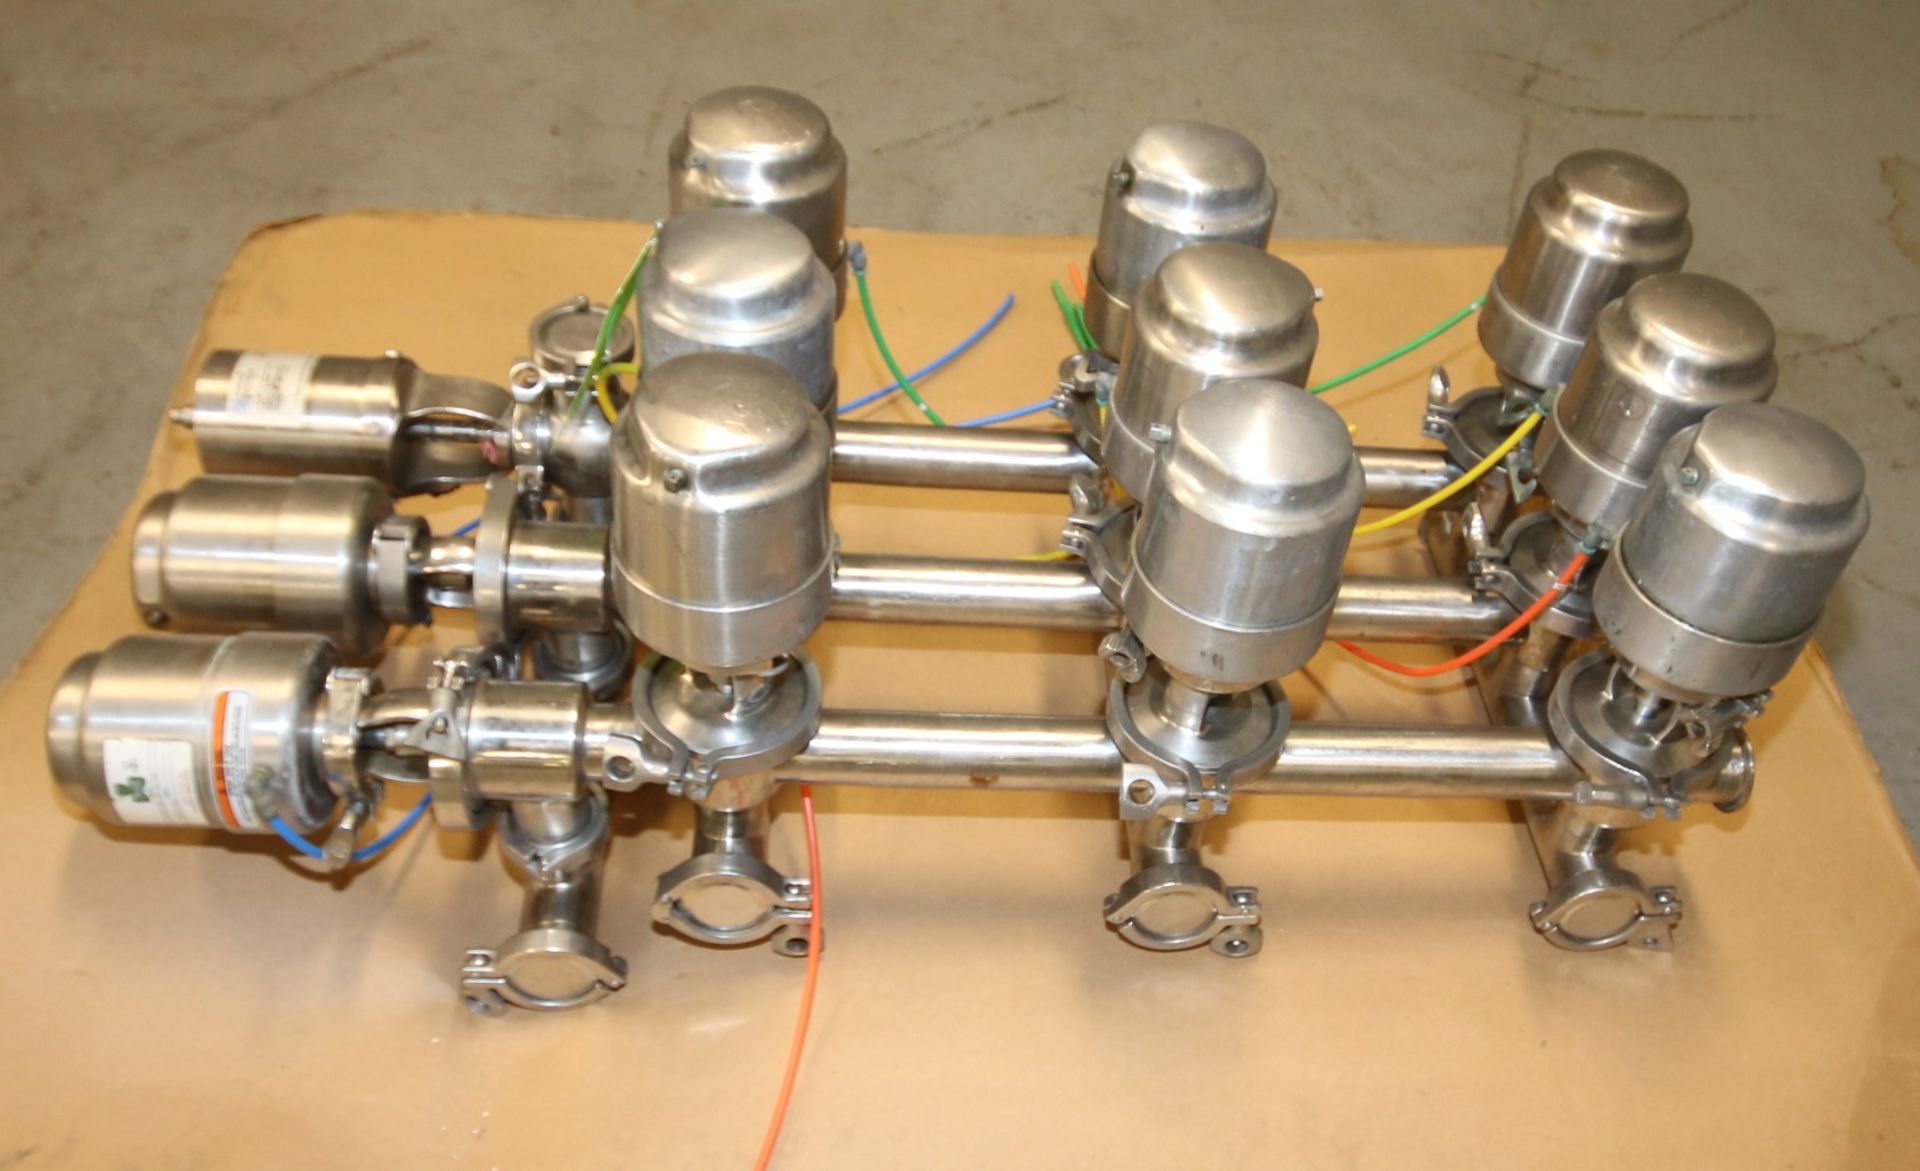 12-Valve Tri-Clover & WCB 2" S/S Air Valve Manifold / Cluster with Model 361 Valves, - Image 2 of 4